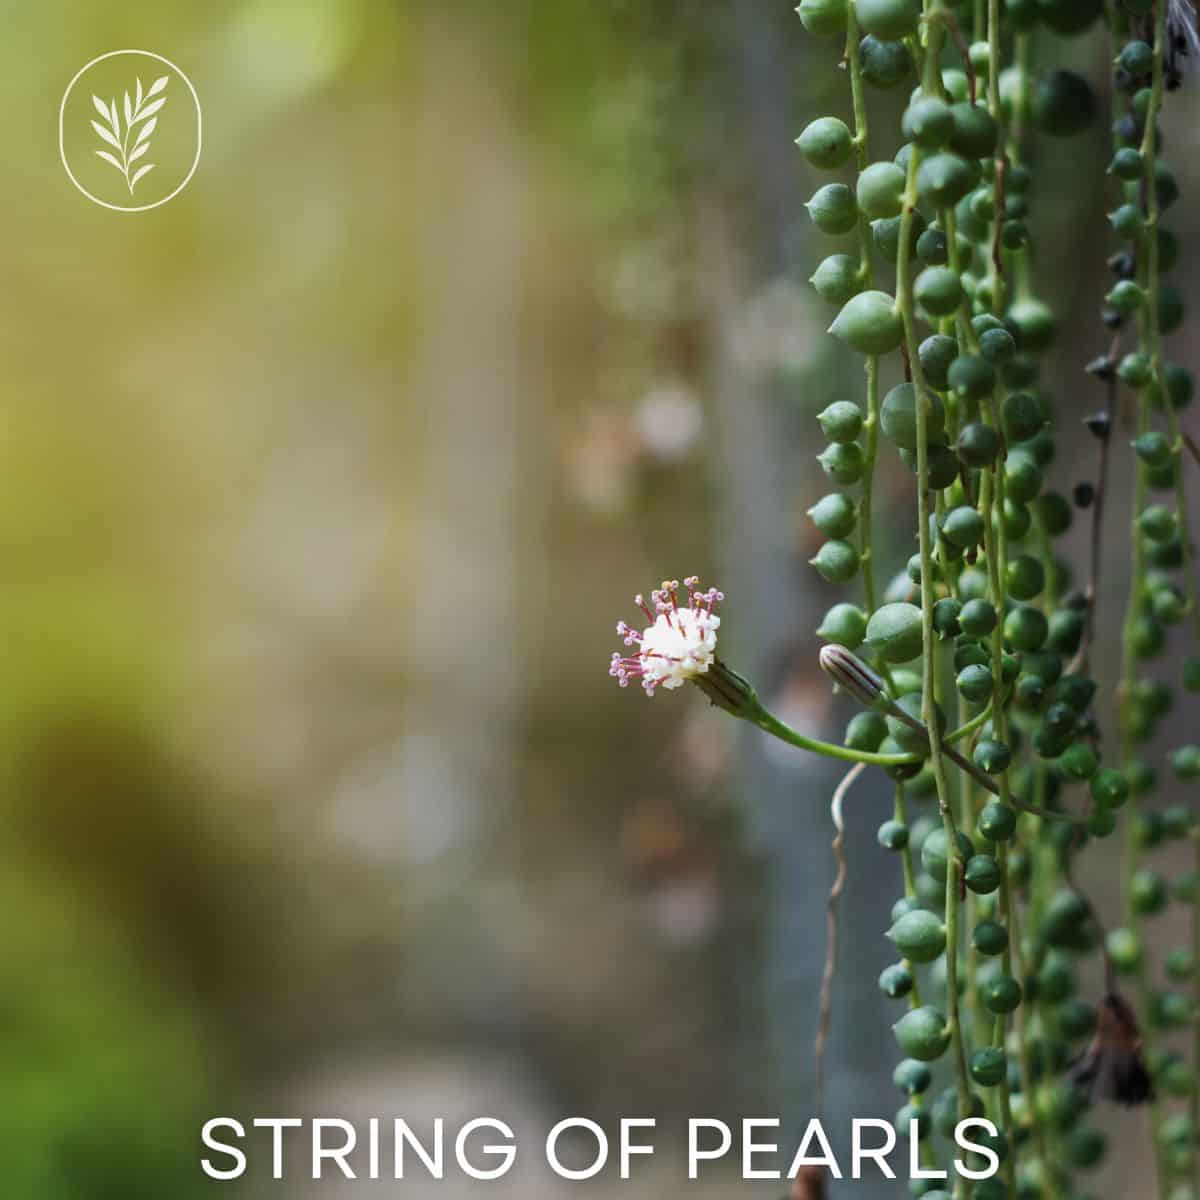 String of pearls via @home4theharvest